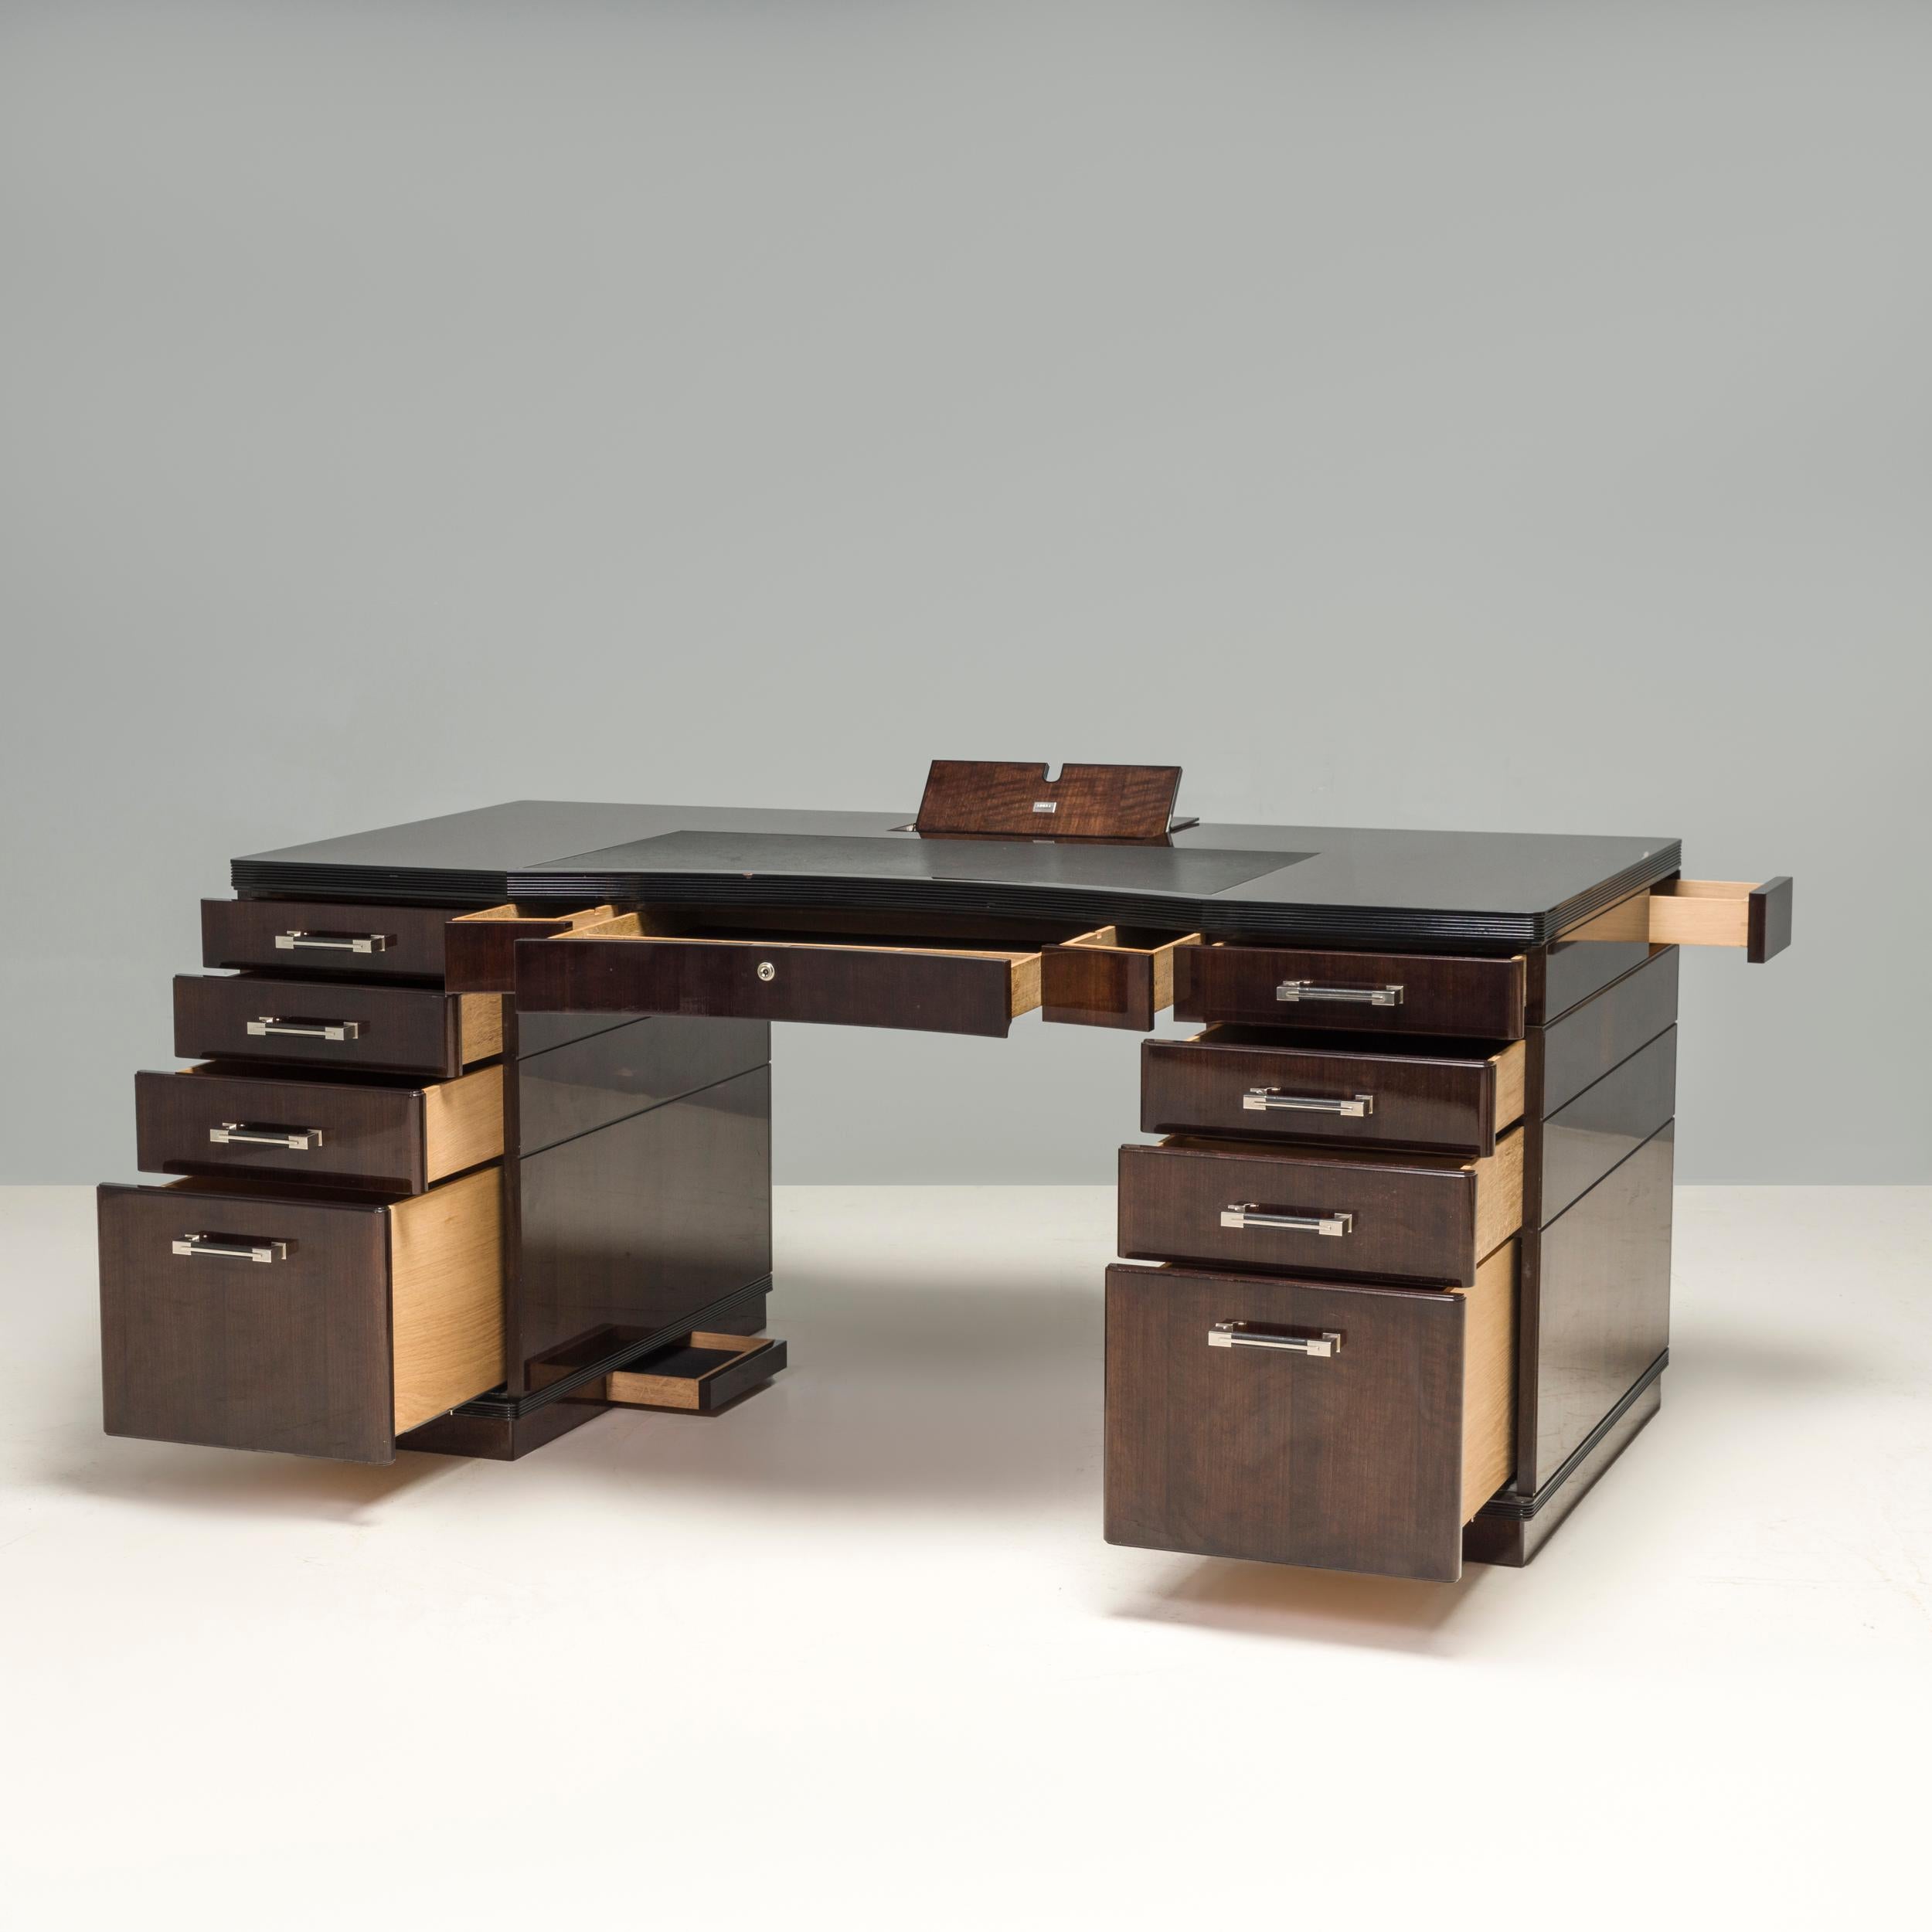 Beautifully constructed, the Linley Writing Desk is the perfect choice for any contemporary home office, with plenty of flexible storage in a sophisticated and elegant design. Its drawers are intelligently arranged for seamless organisation, with